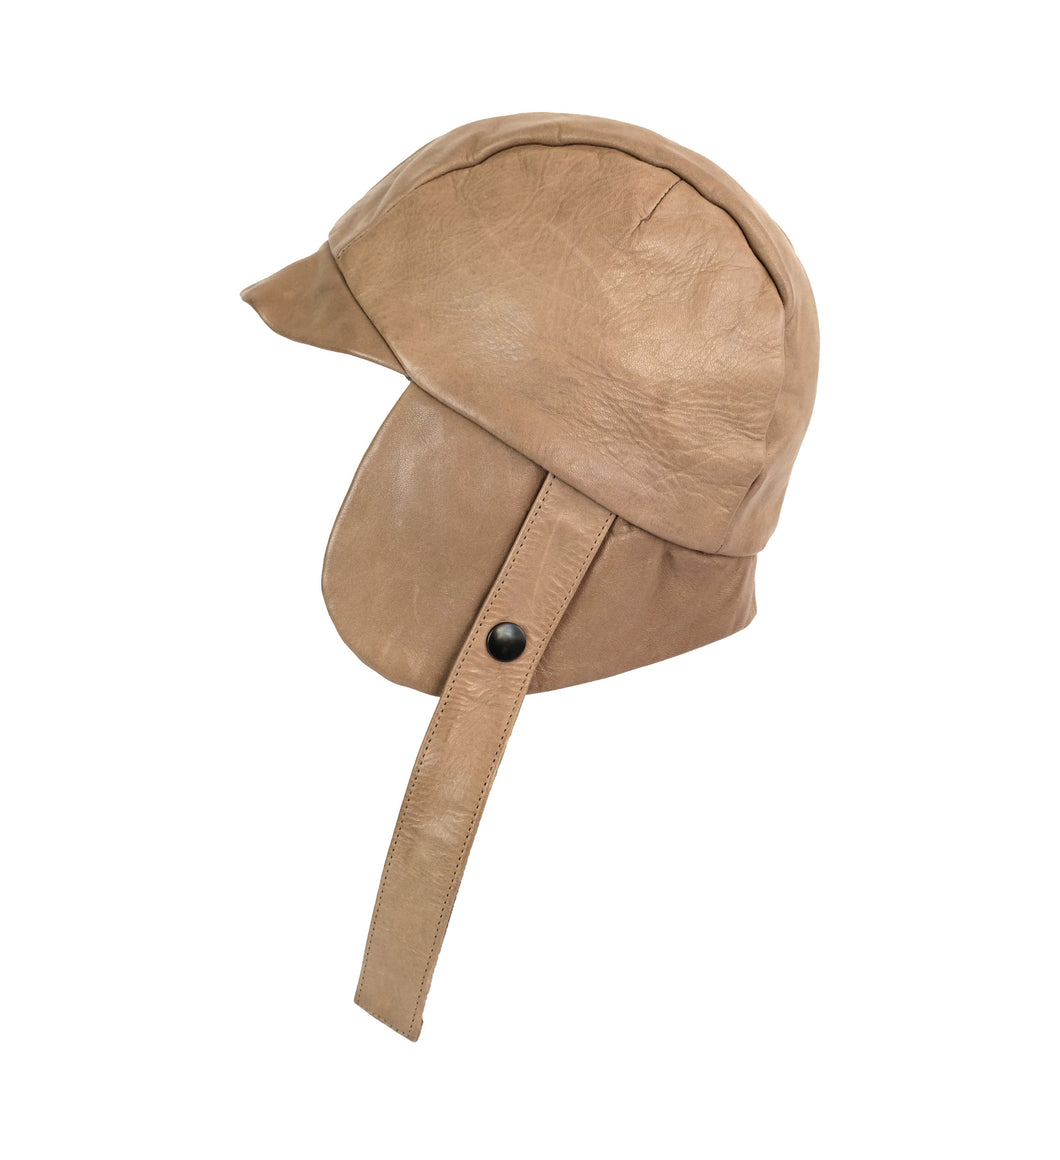 Ally Capellino Aviator Hat in Taupe Leather, M – Menage Modern Vintage